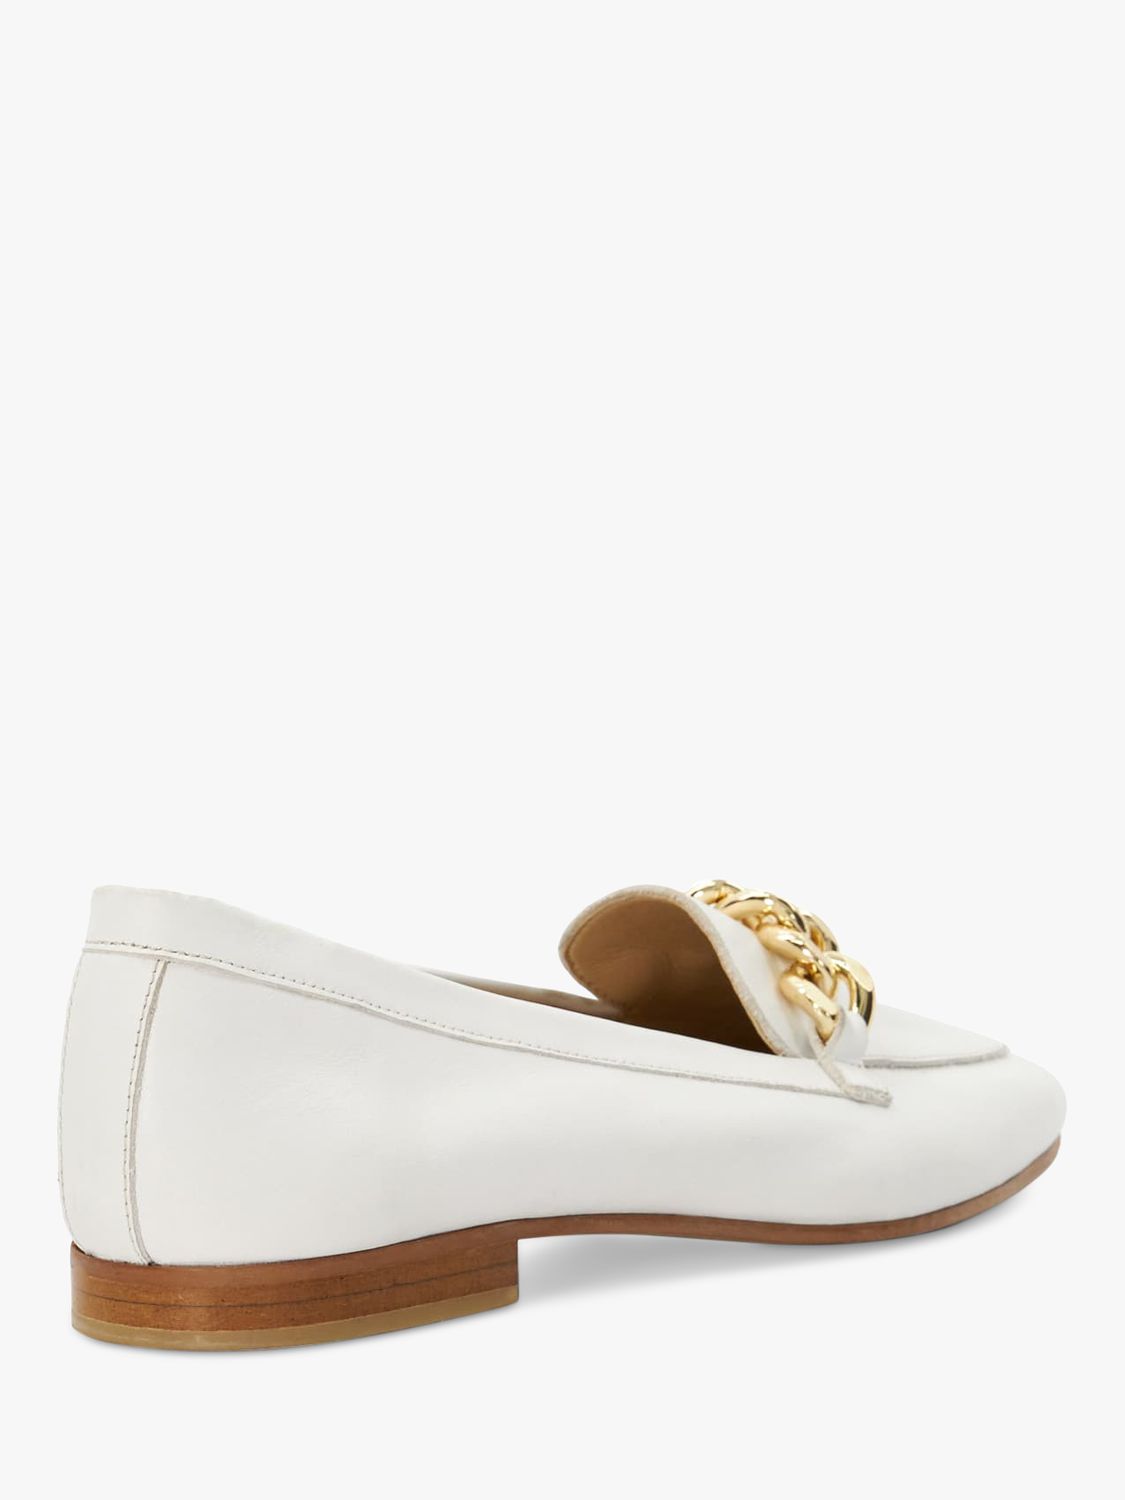 Buy Dune Goldsmith Leather Chain Trim Loafers, White Online at johnlewis.com